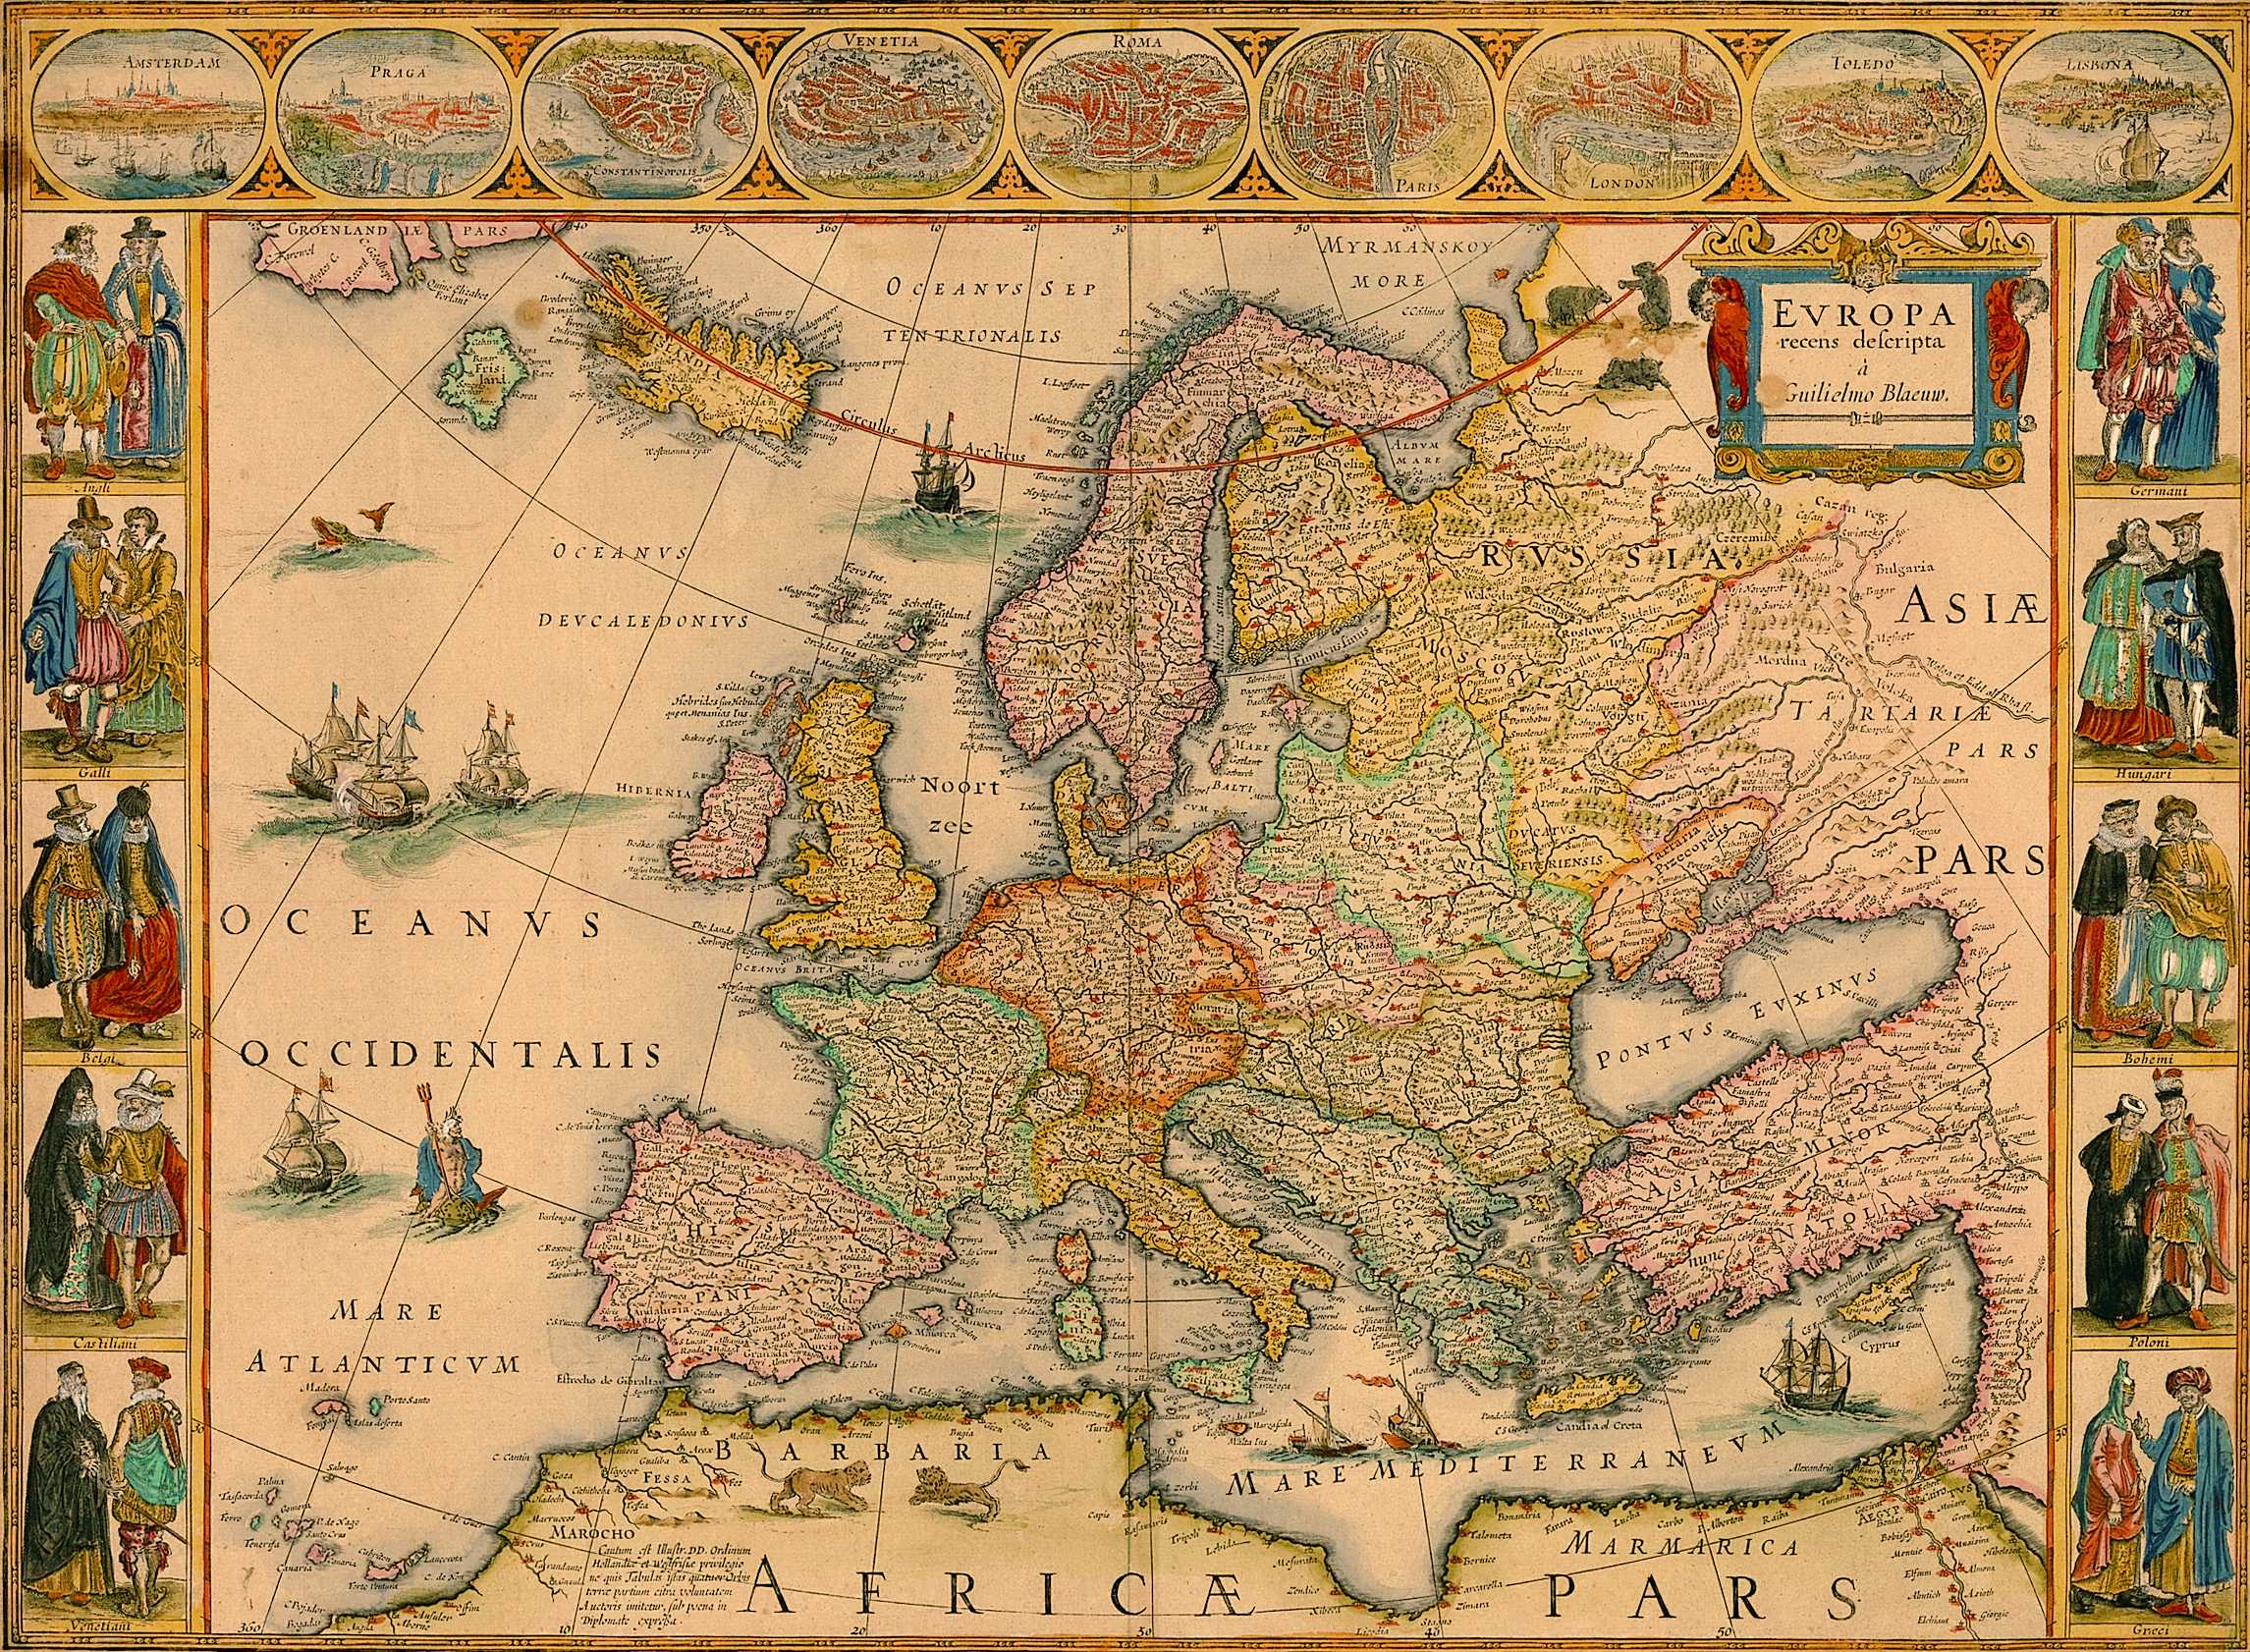 Old map of Europe Renaissance period